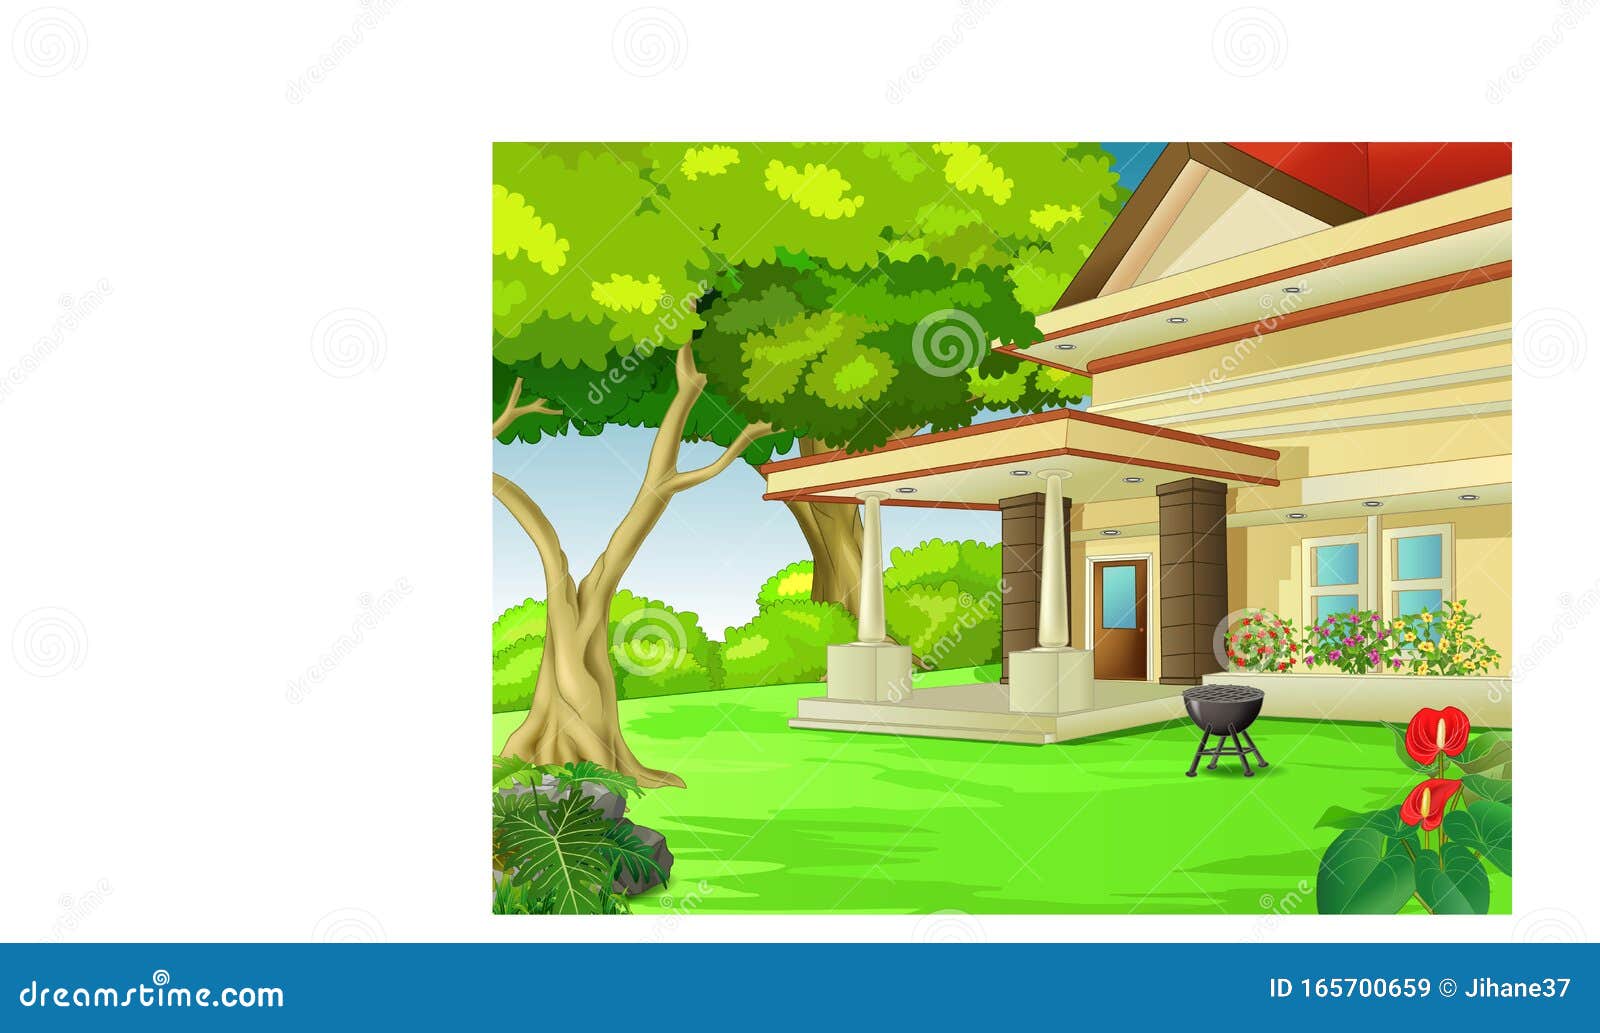 Yard Cartoons, Illustrations & Vector Stock Images - 37217 Pictures to